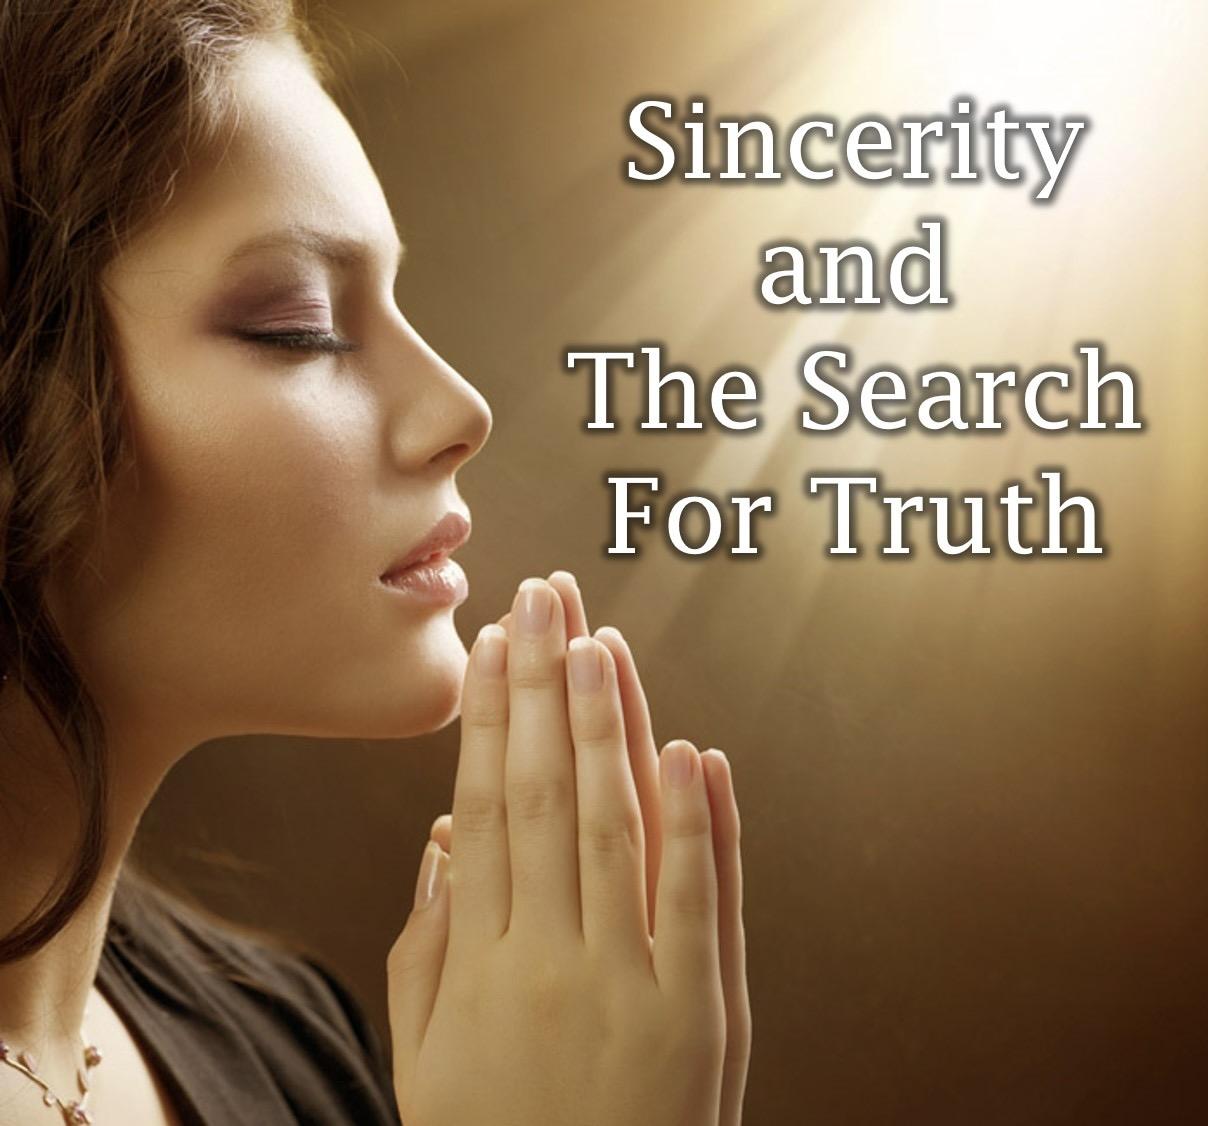 Sincerity and the Search for Truth